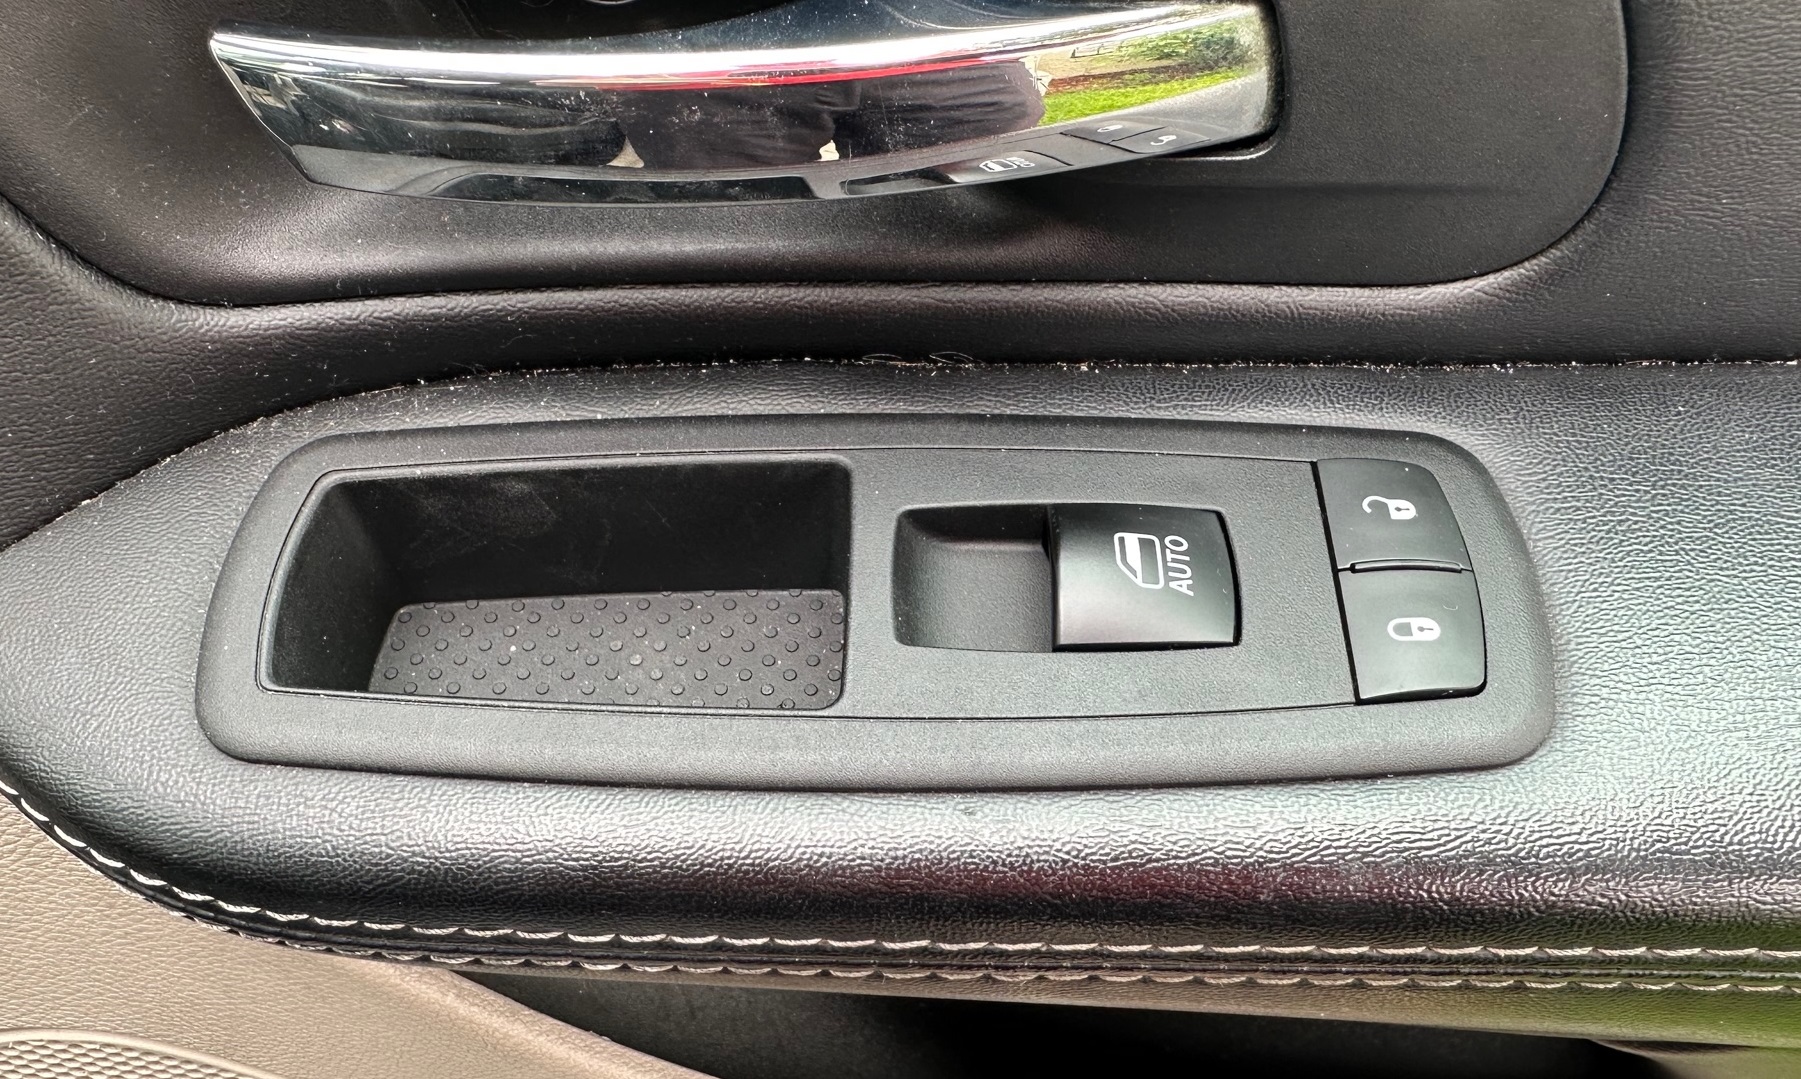 How to Replace Power Window Switch on a 2015 Town & Country